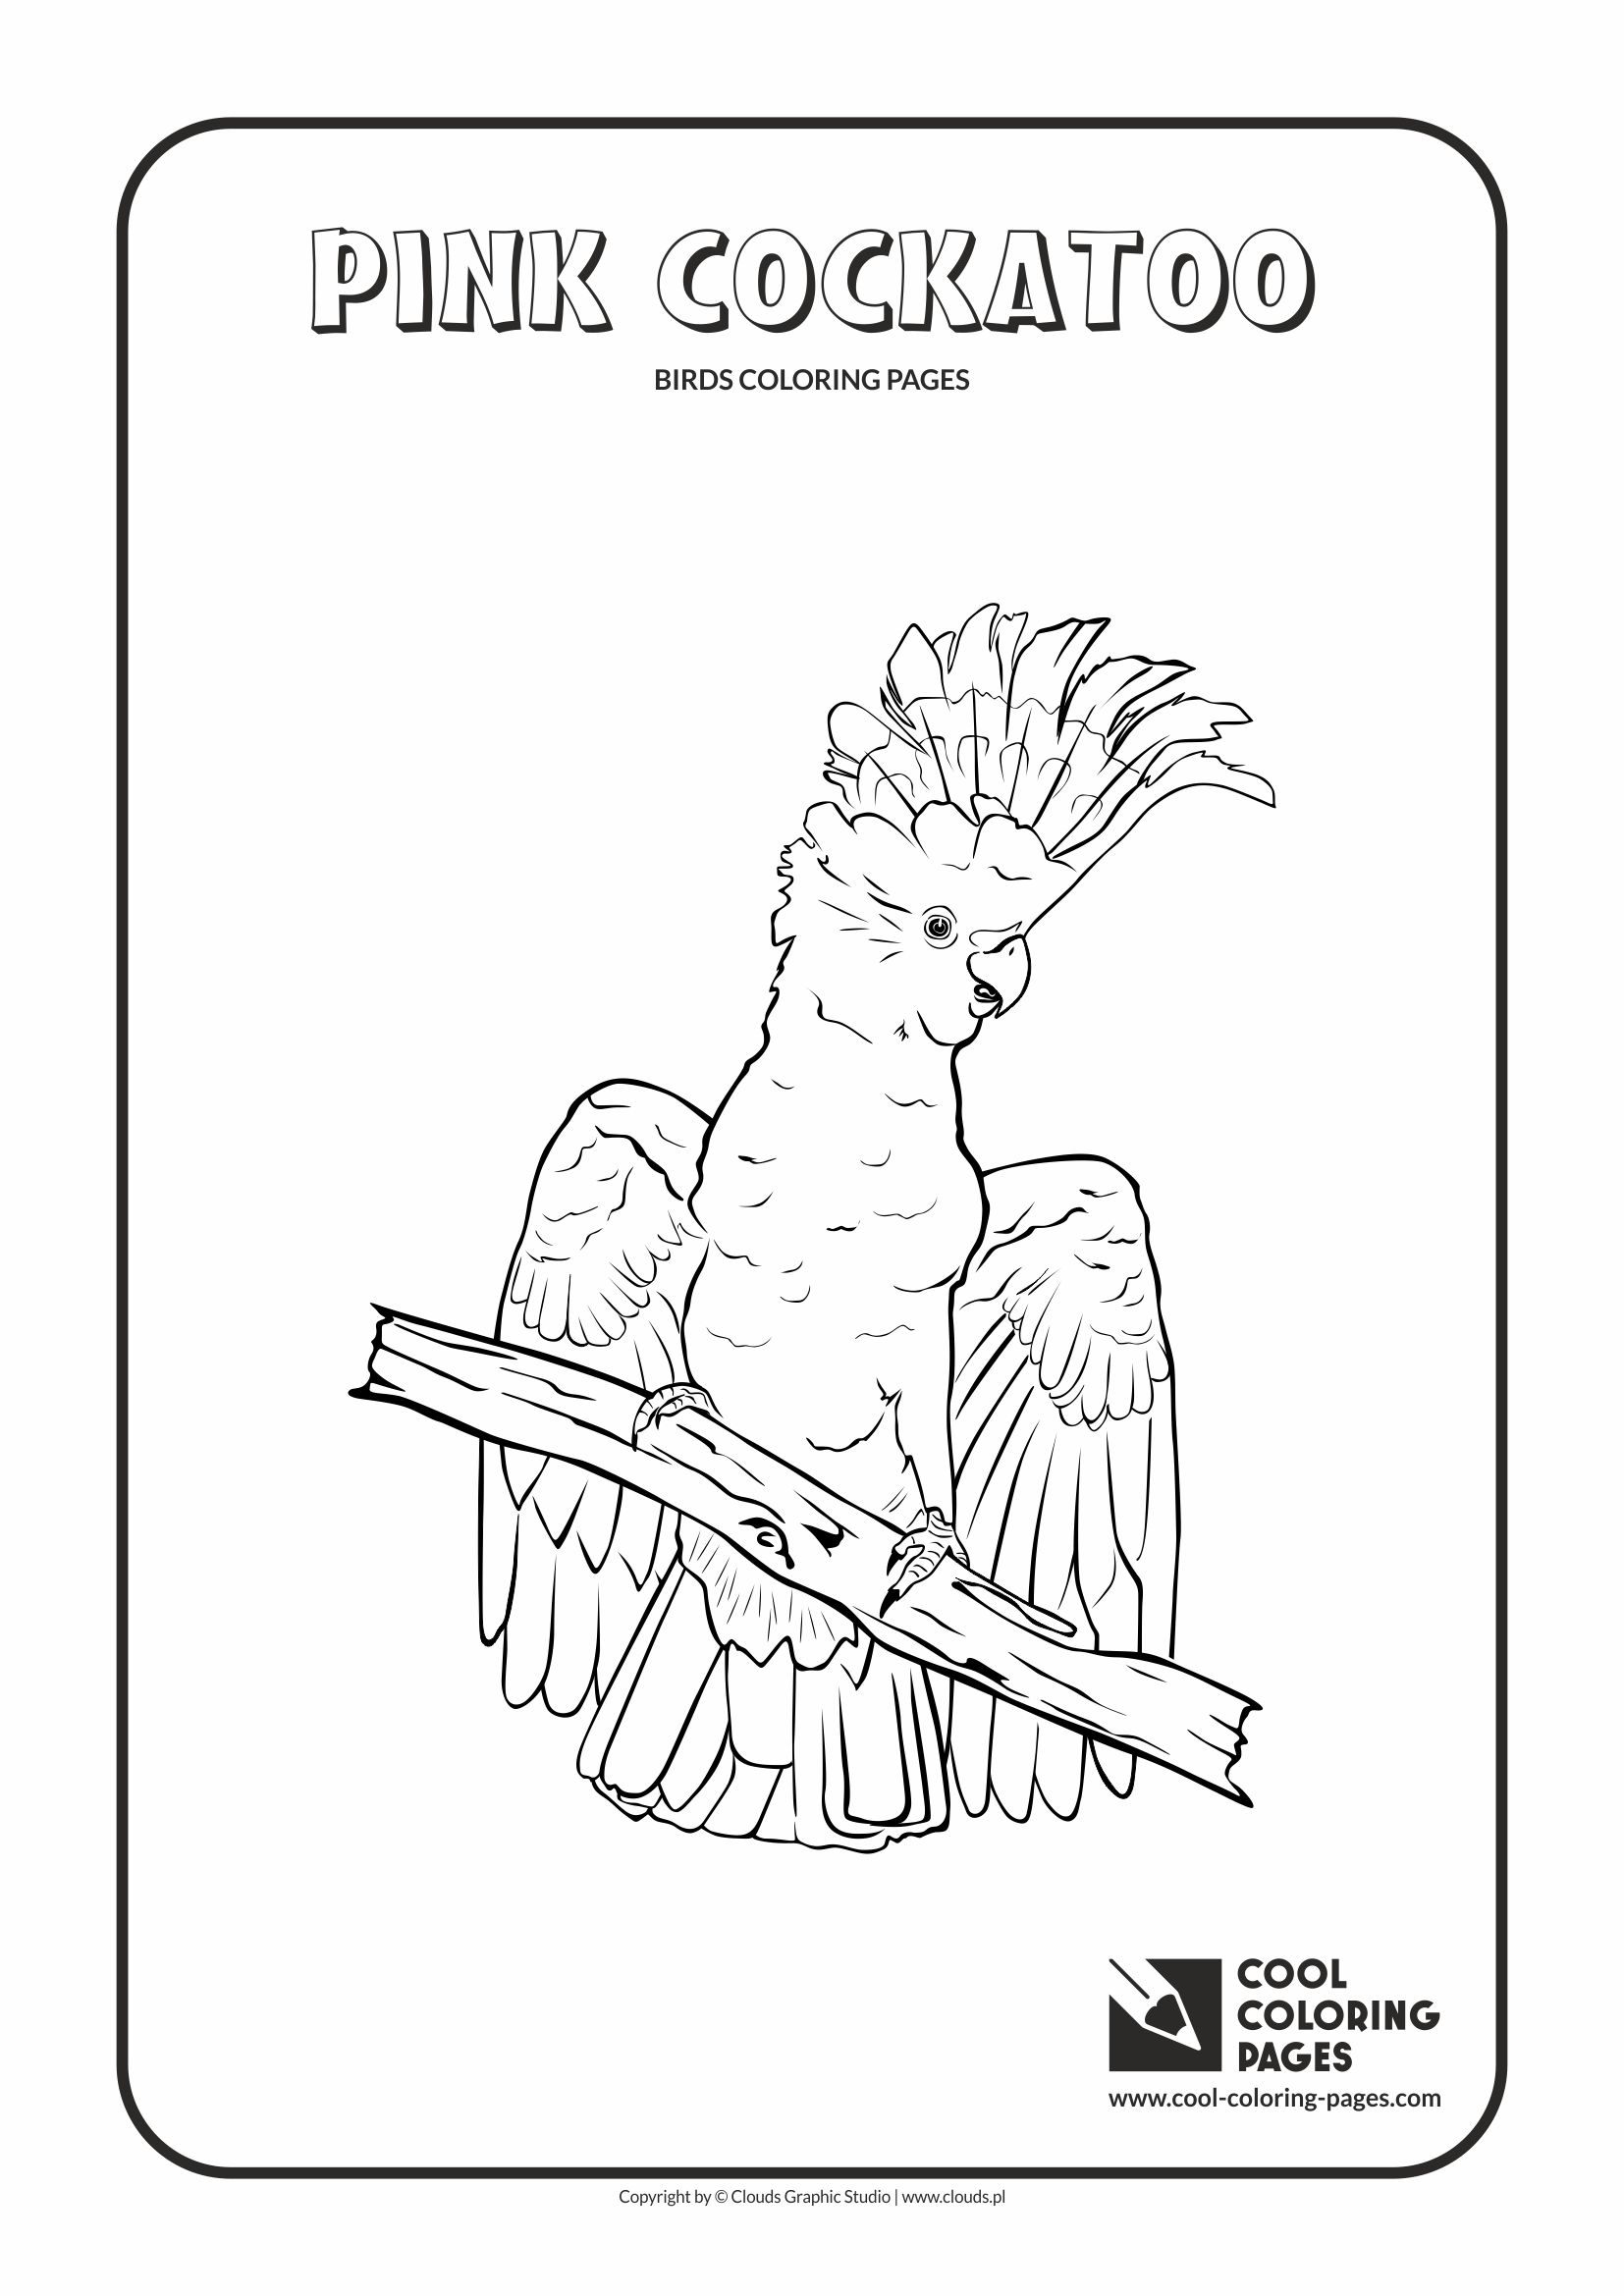 Download Cool Coloring Pages Birds coloring pages - Cool Coloring Pages | Free educational coloring pages ...